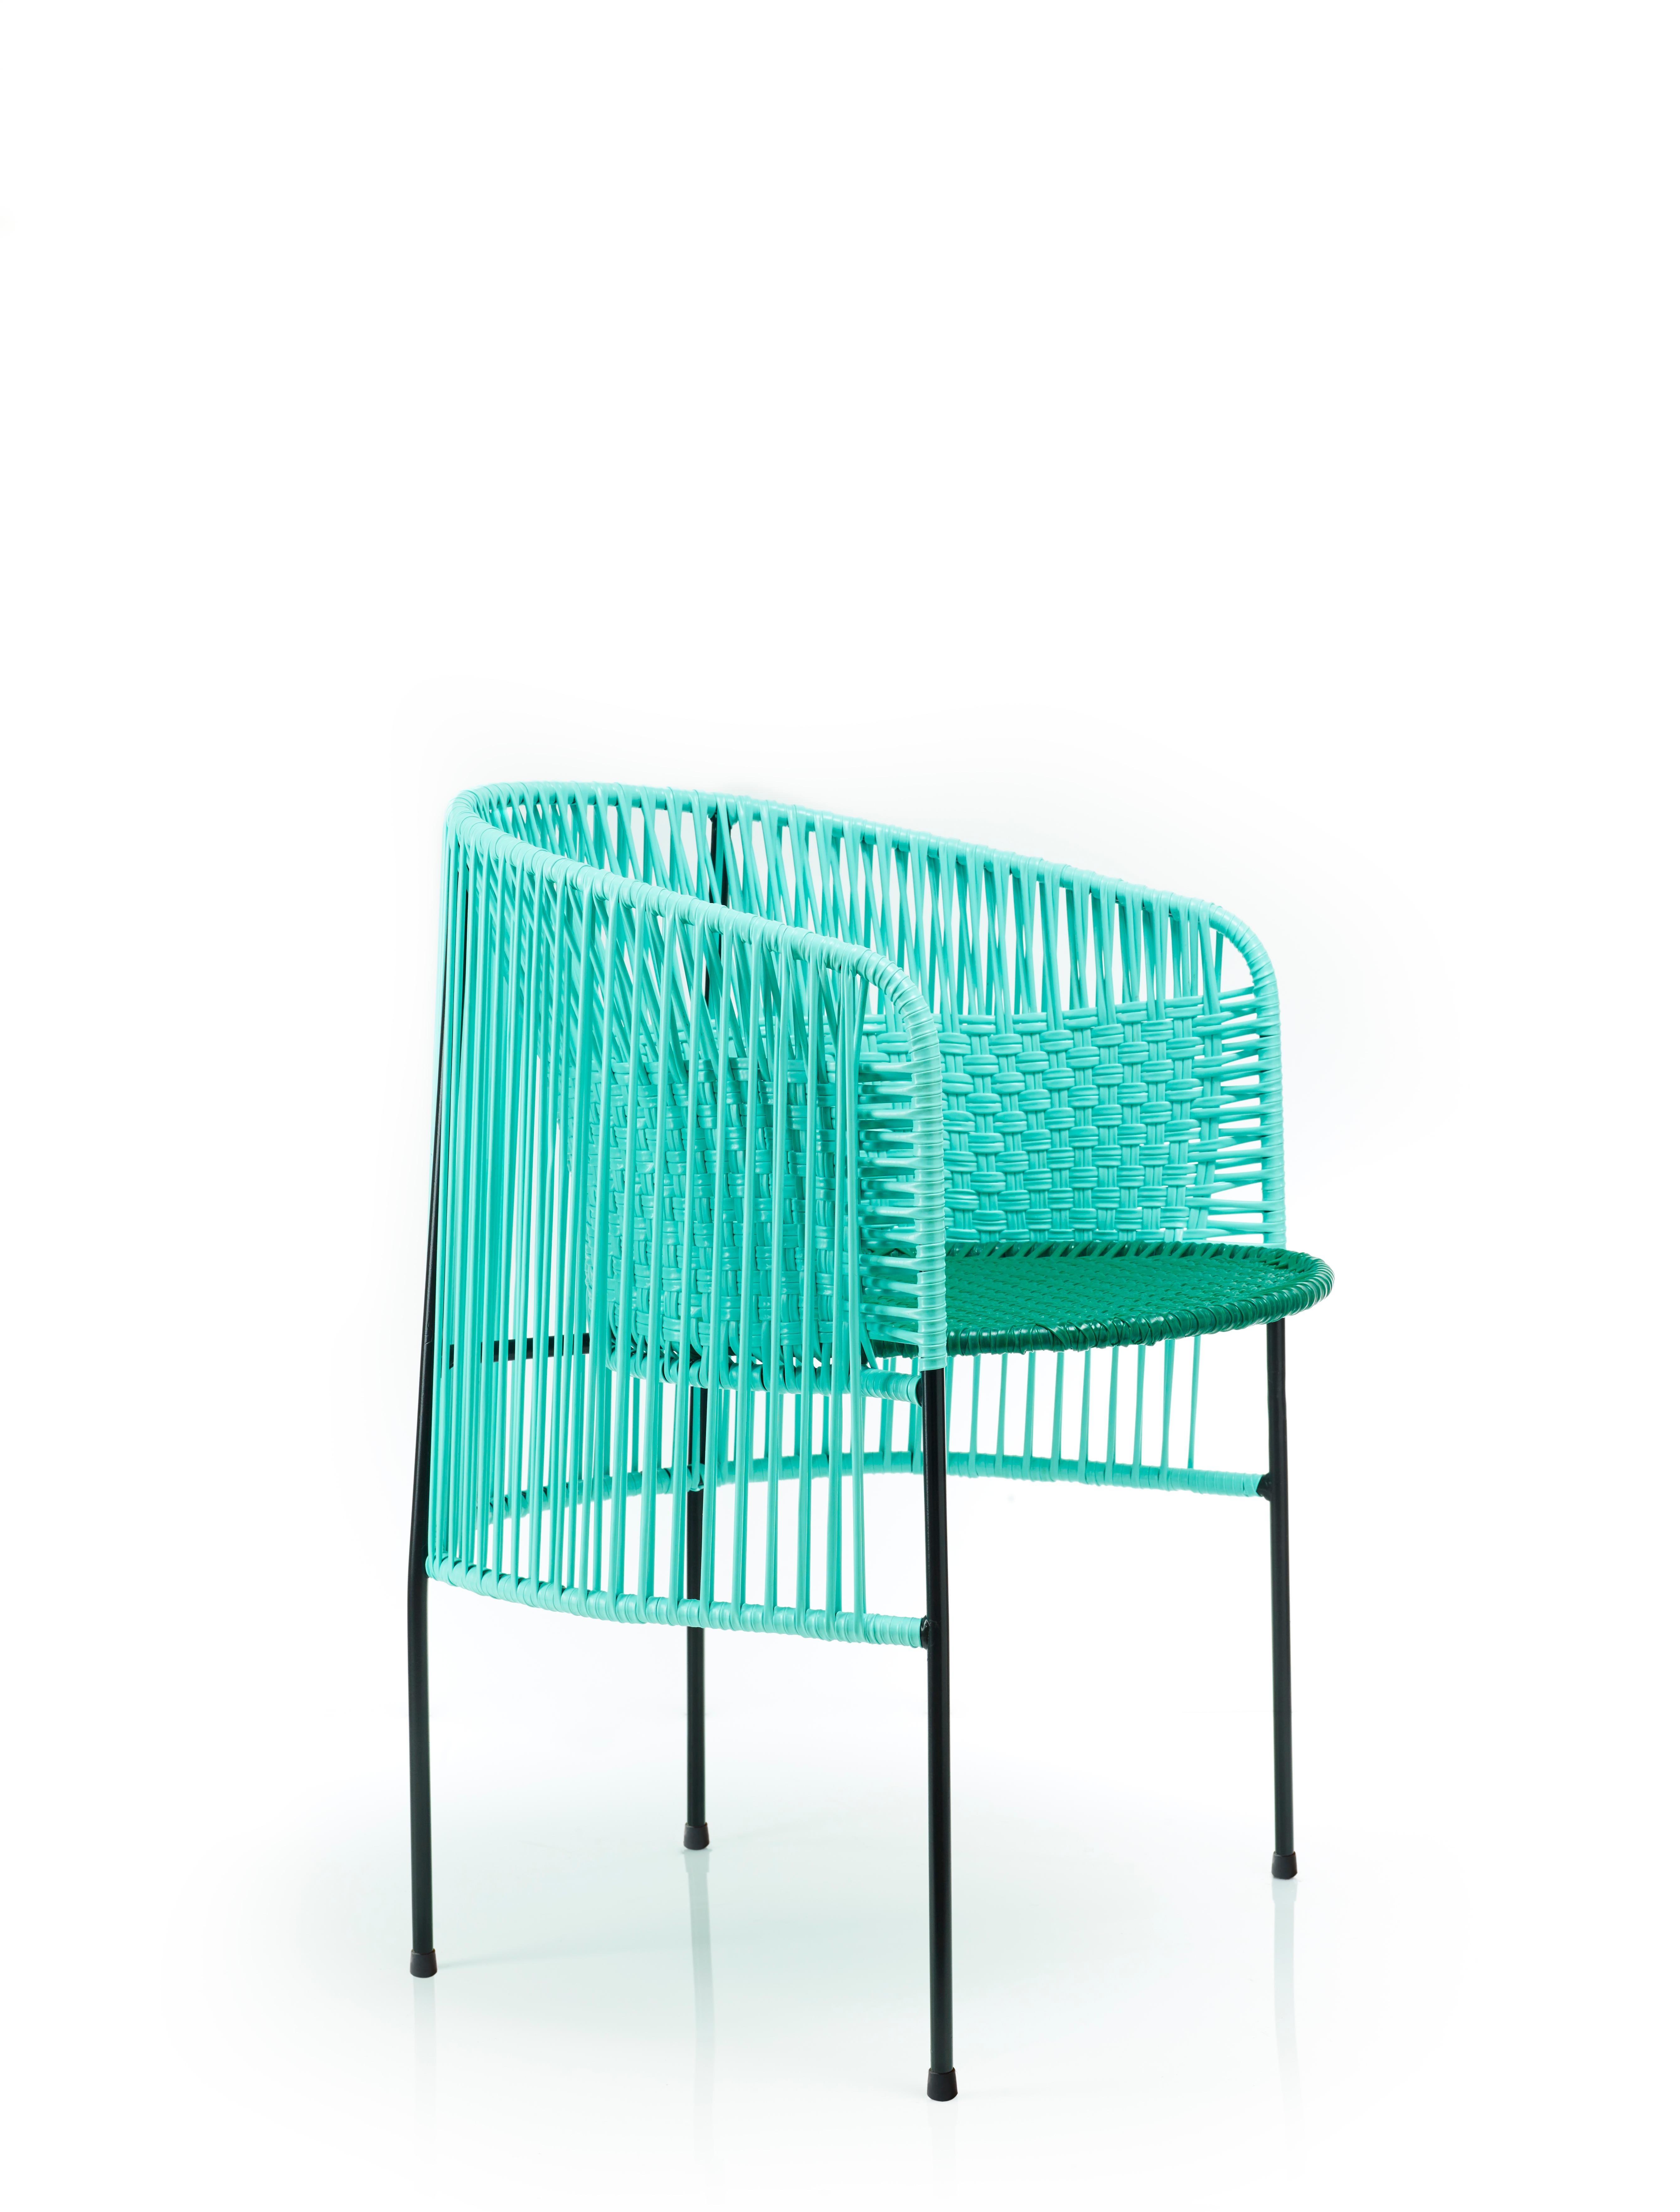 Set of 2 Mint caribe dining chair by Sebastian Herkner.
Materials: Galvanized and powder-coated tubular steel. PVC strings are made from recycled plastic.
Technique: Made from recycled plastic and weaved by local craftspeople in Colombia.